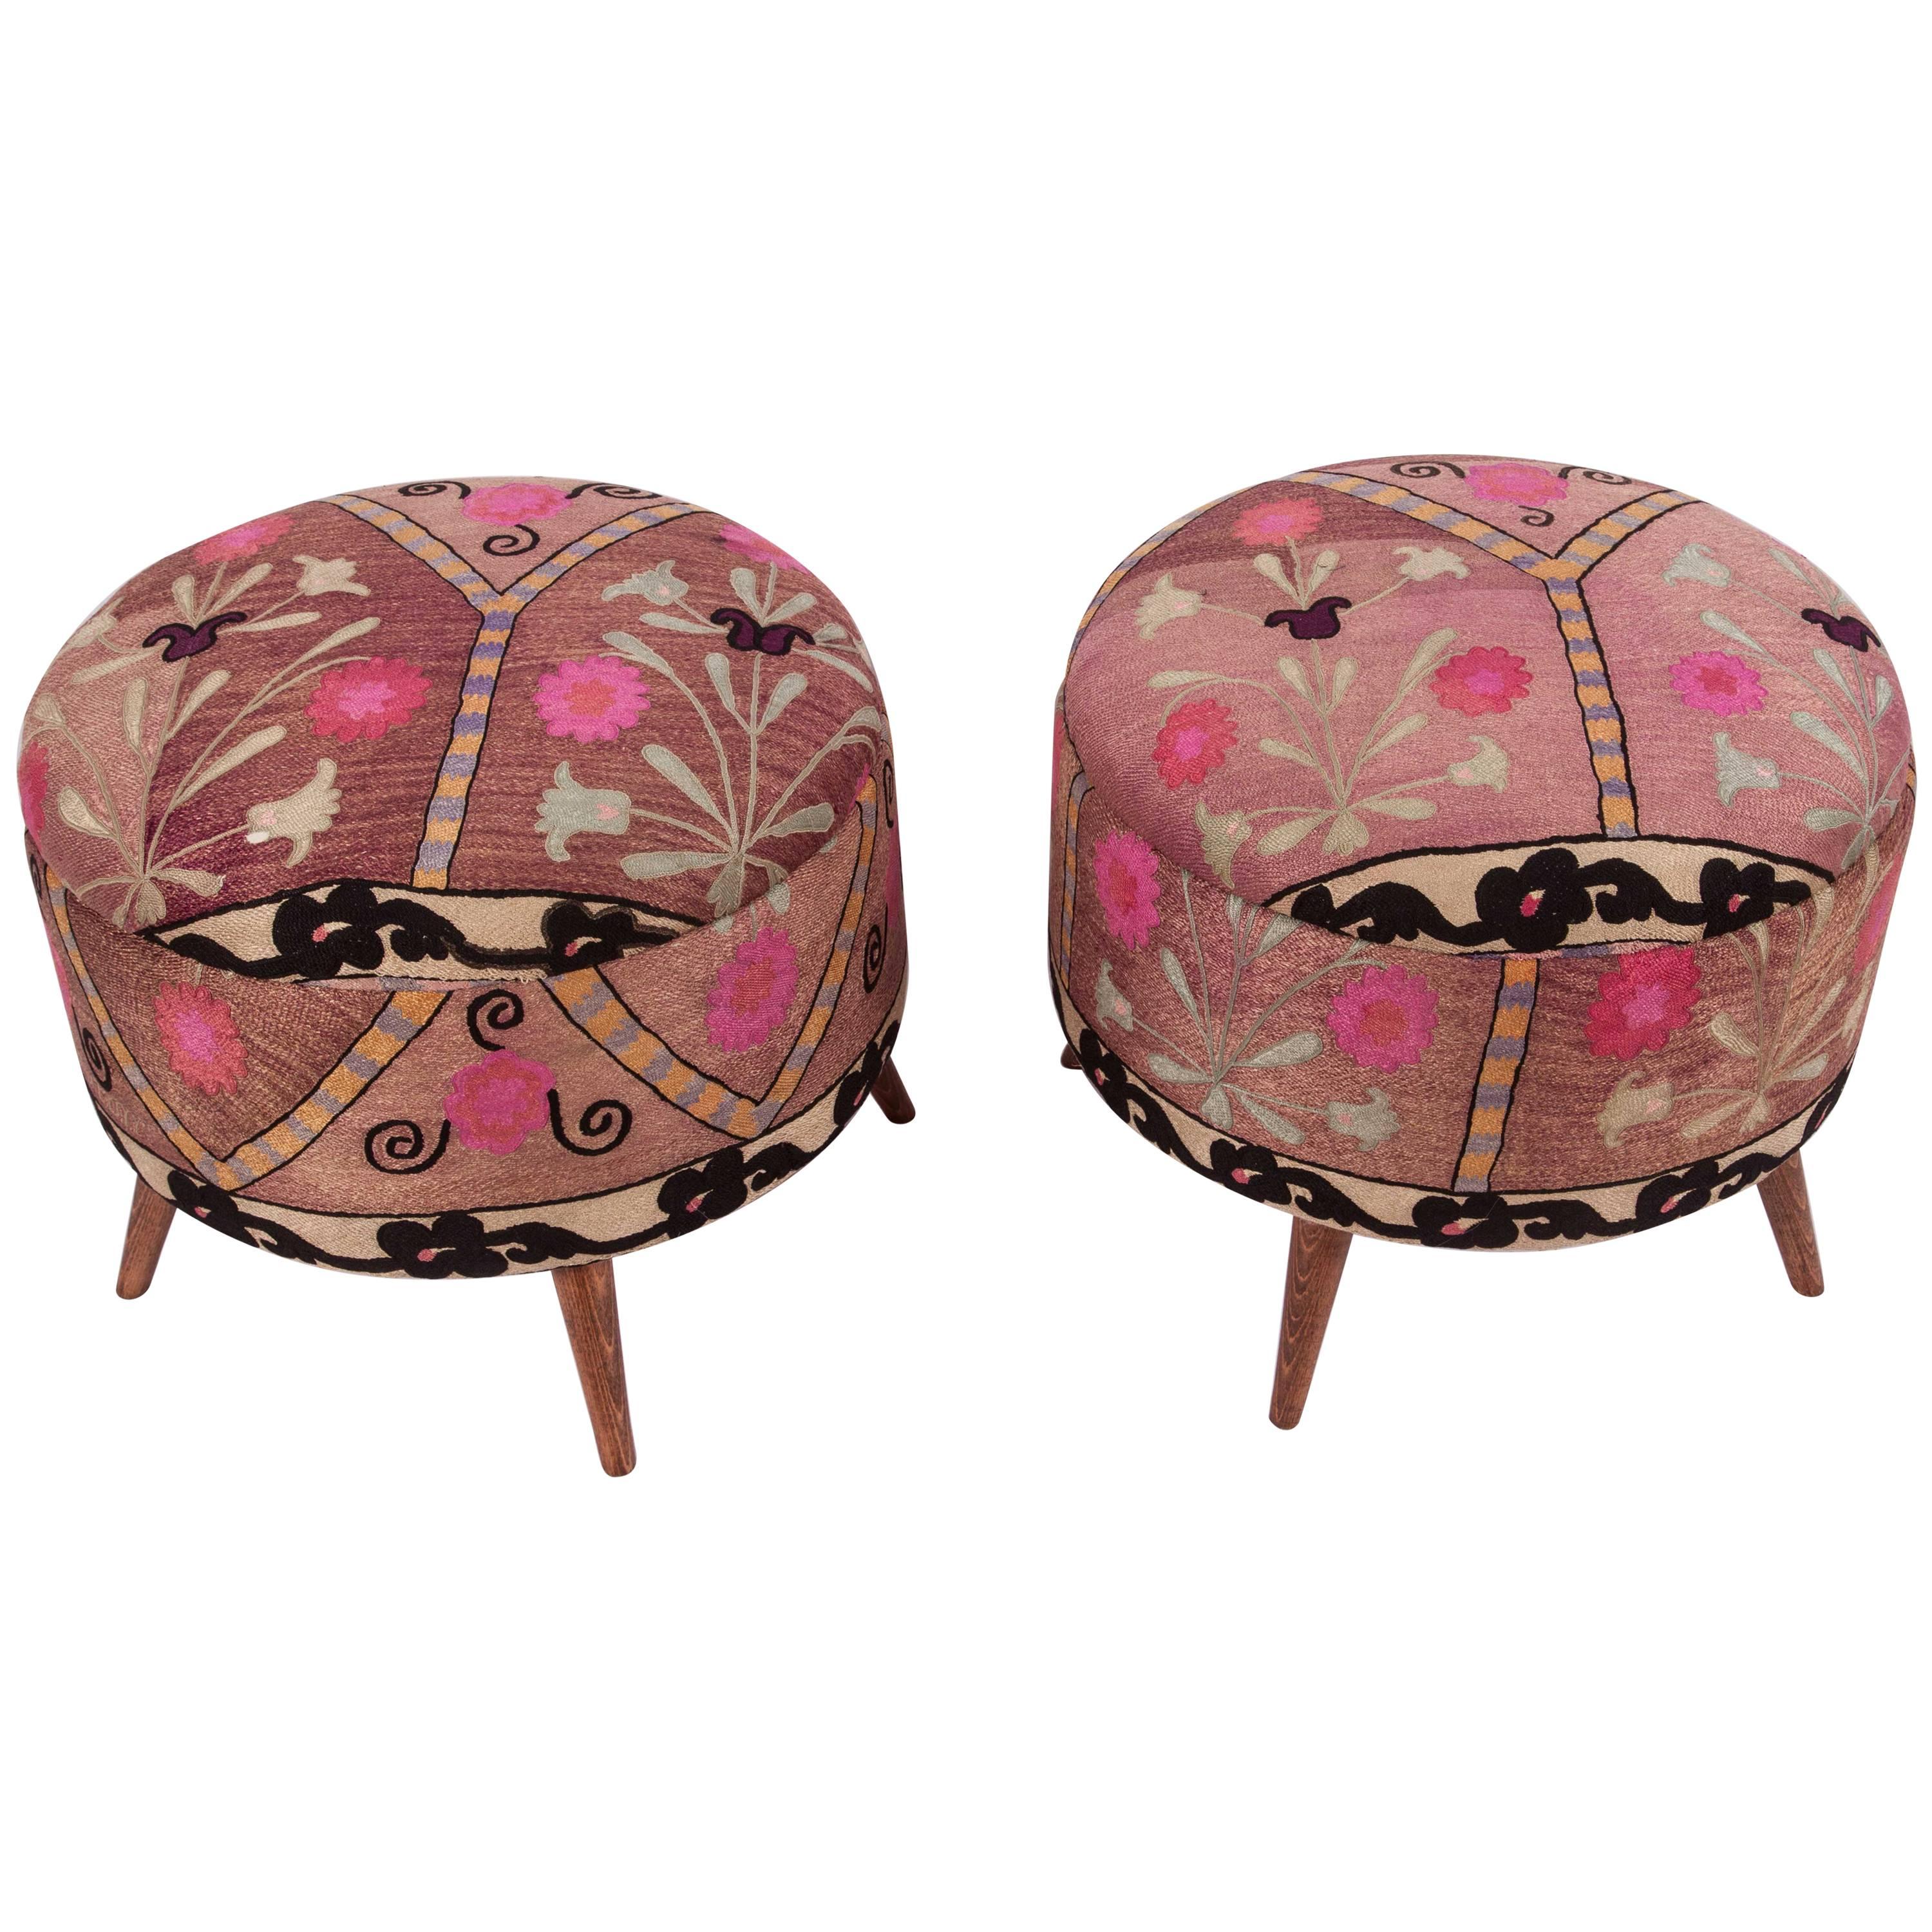 Ottoman or Poufs Fashioned from a Mid-20th Century Tashkent Silk Suzani